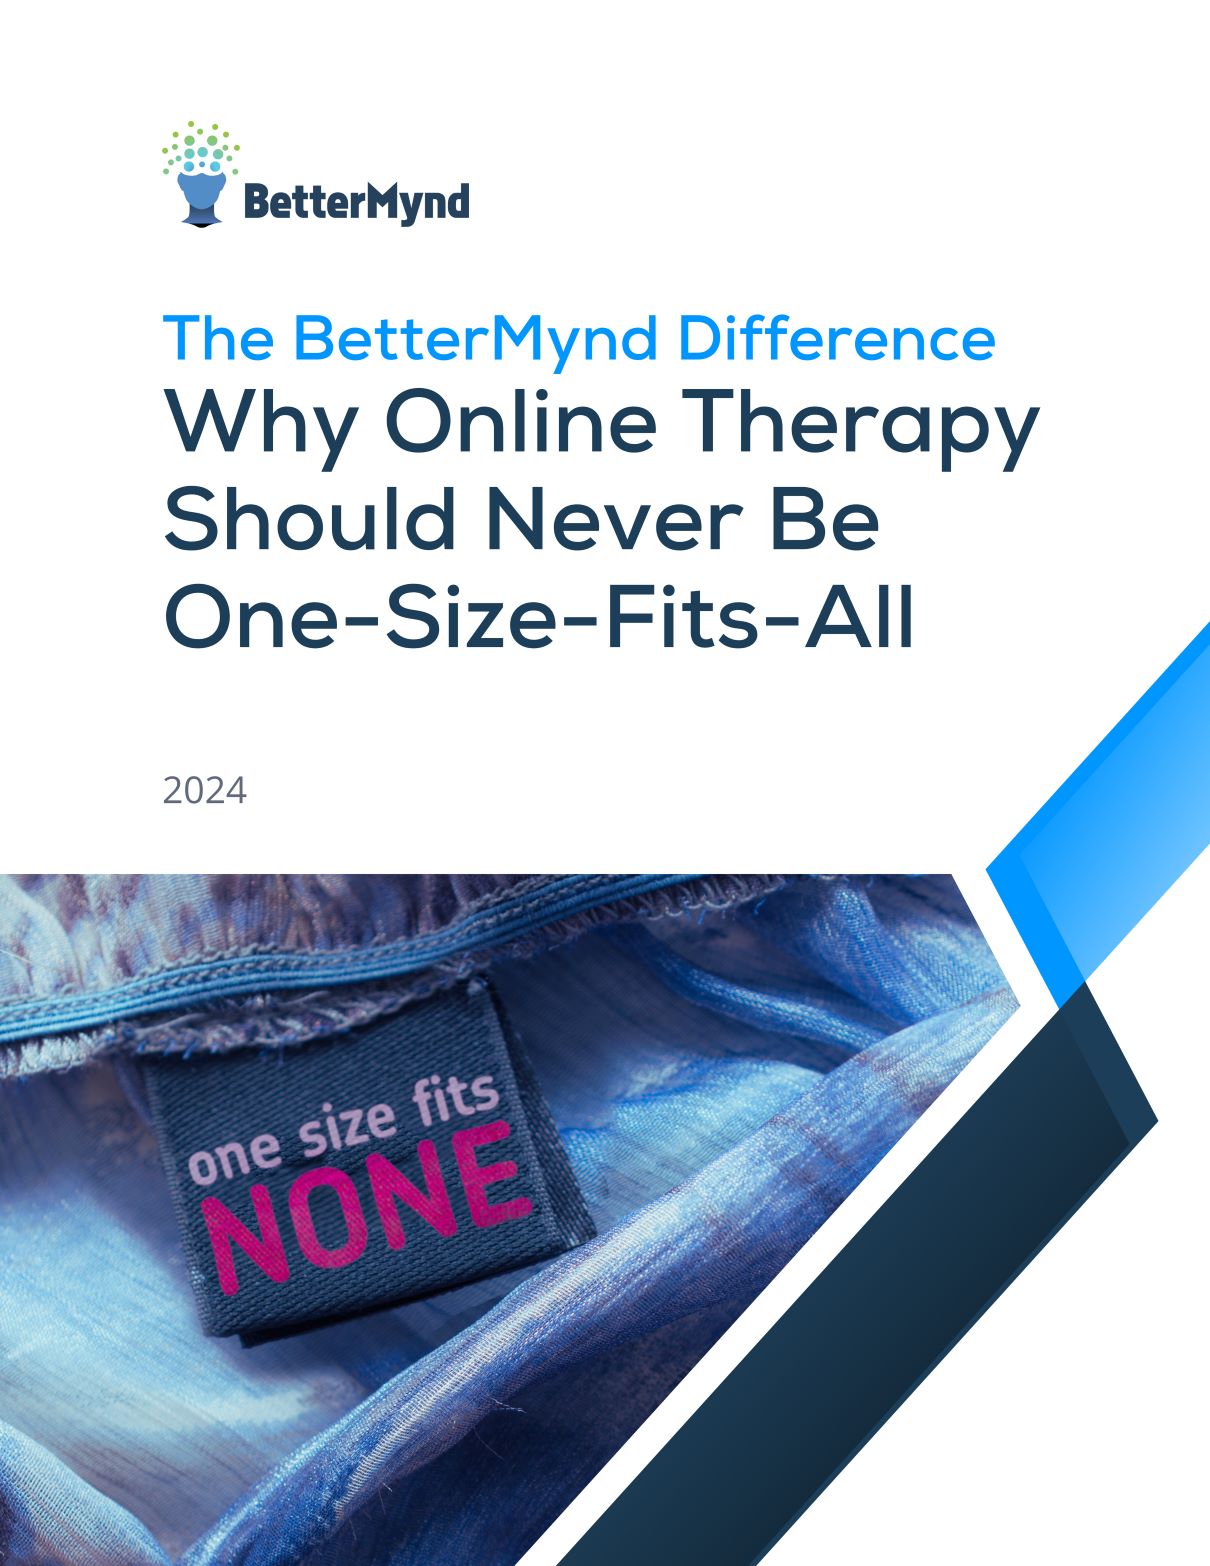 The BetterMynd Difference. Why Online Therapy Should Never Be One Size Fits All